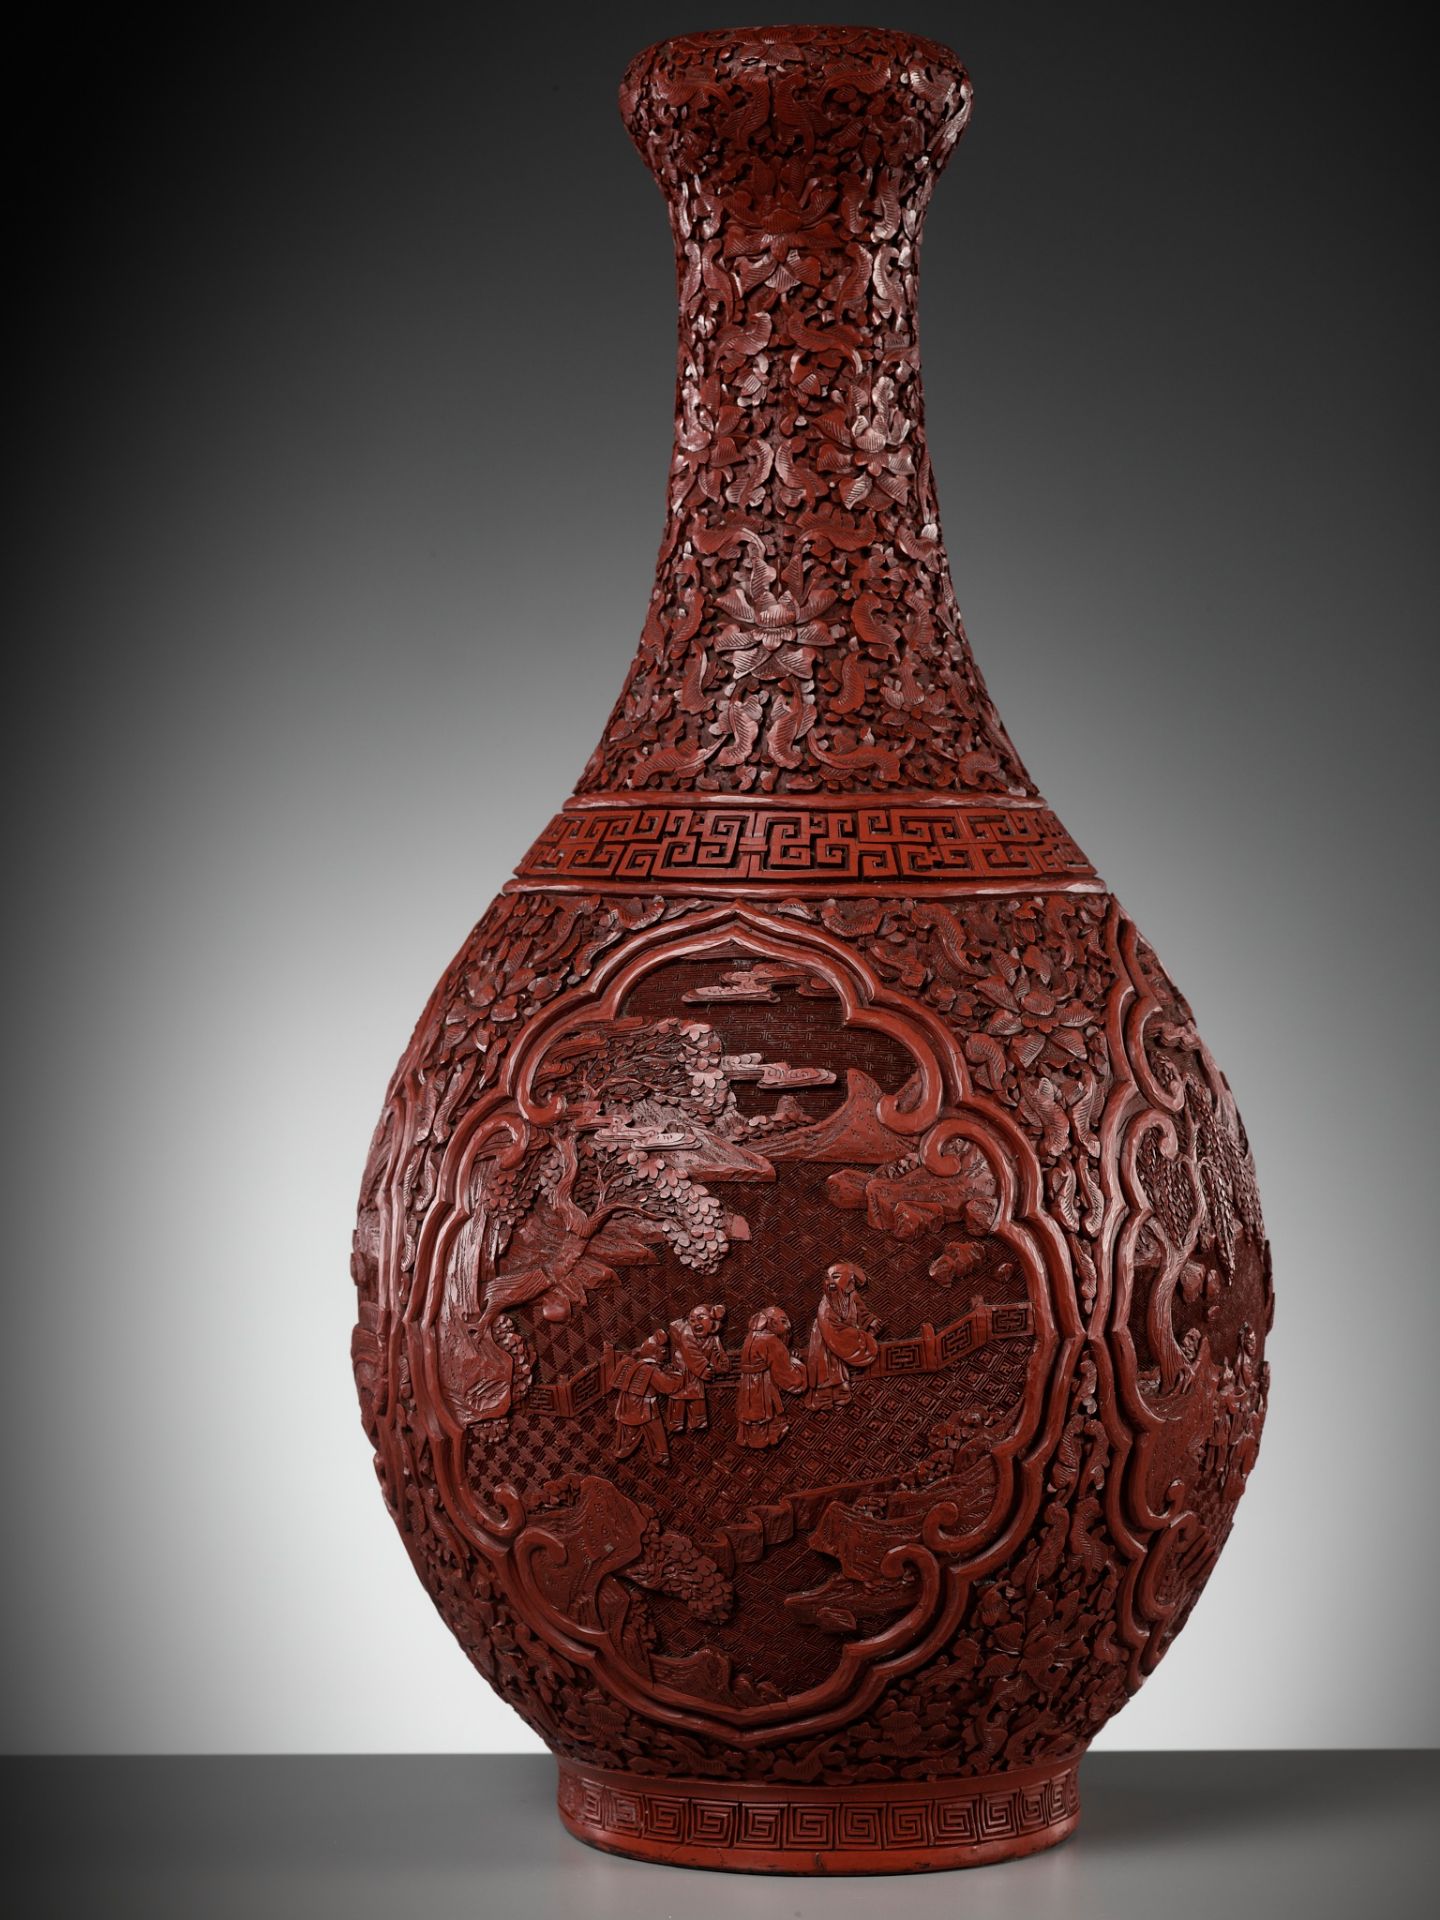 A PAIR OF LARGE CINNABAR LACQUER GARLIC HEAD VASES, CHINA, 1800-1850 - Image 2 of 14